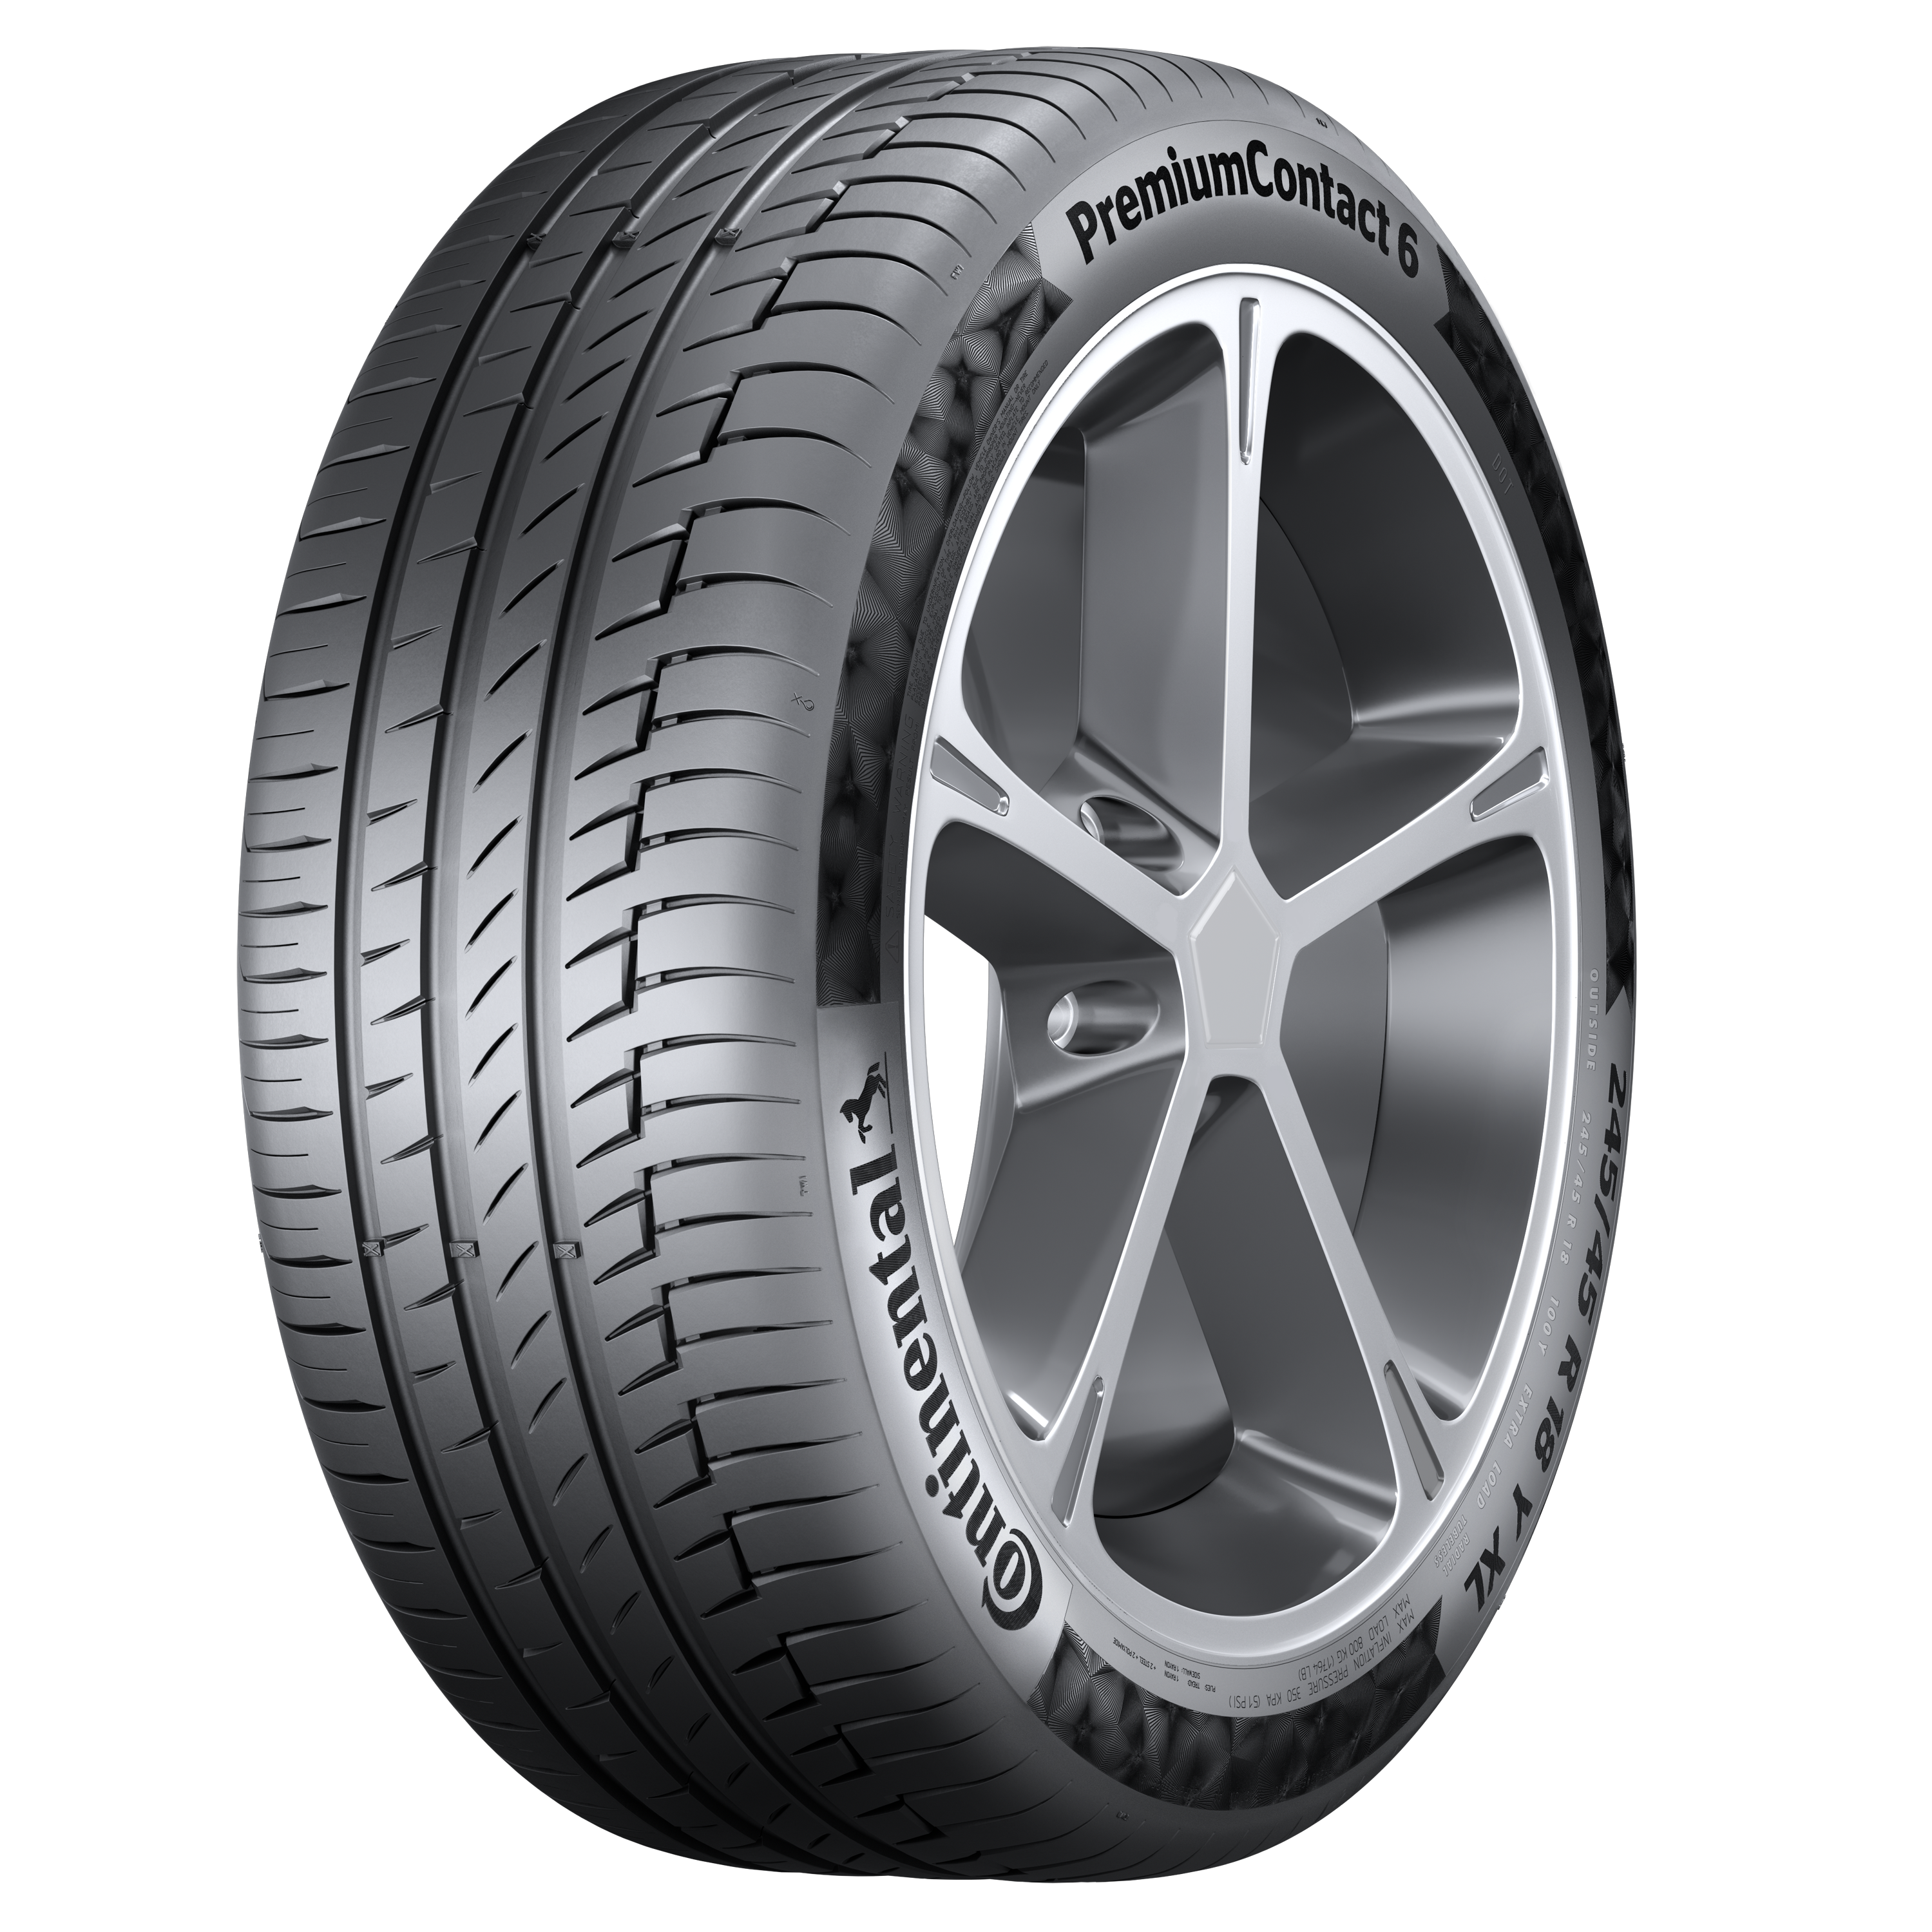 car Continental - Summer from Continental AG tires